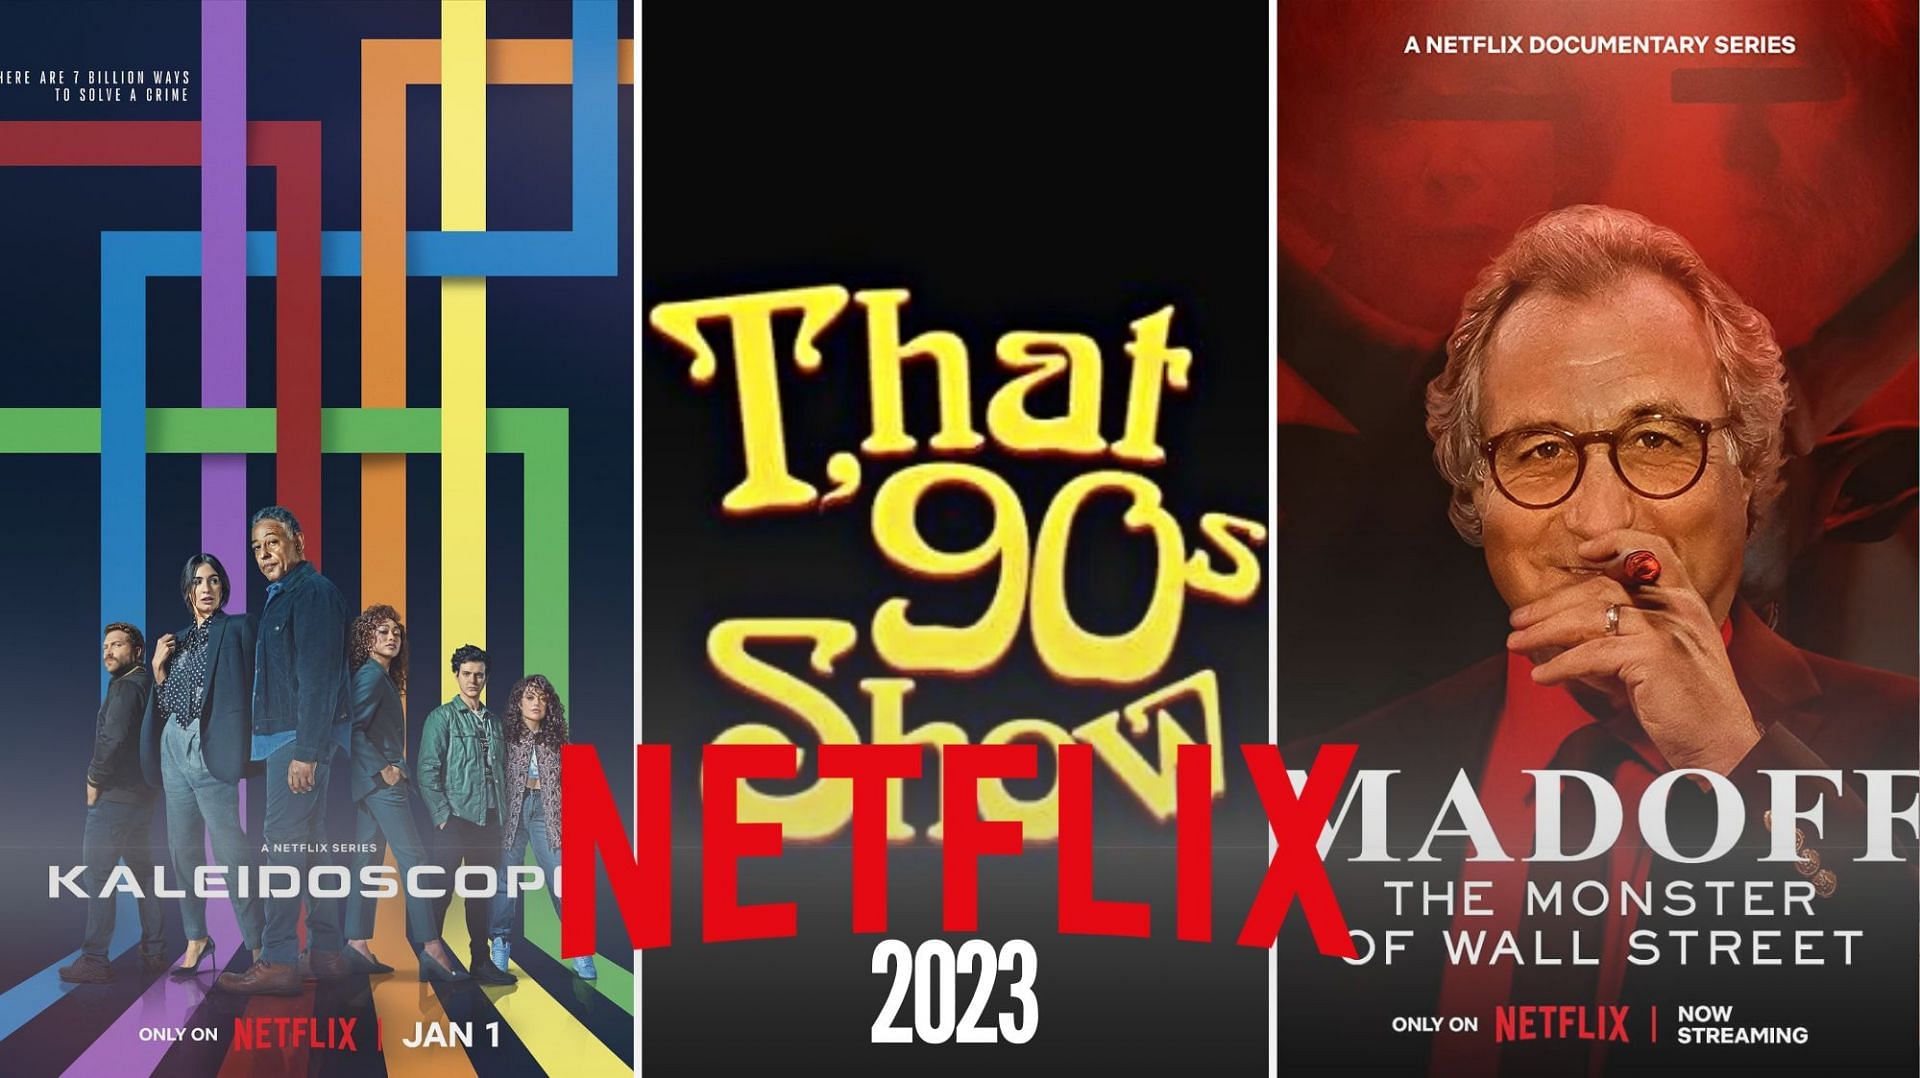 What movies and series are streaming on Netflix in May 2023?